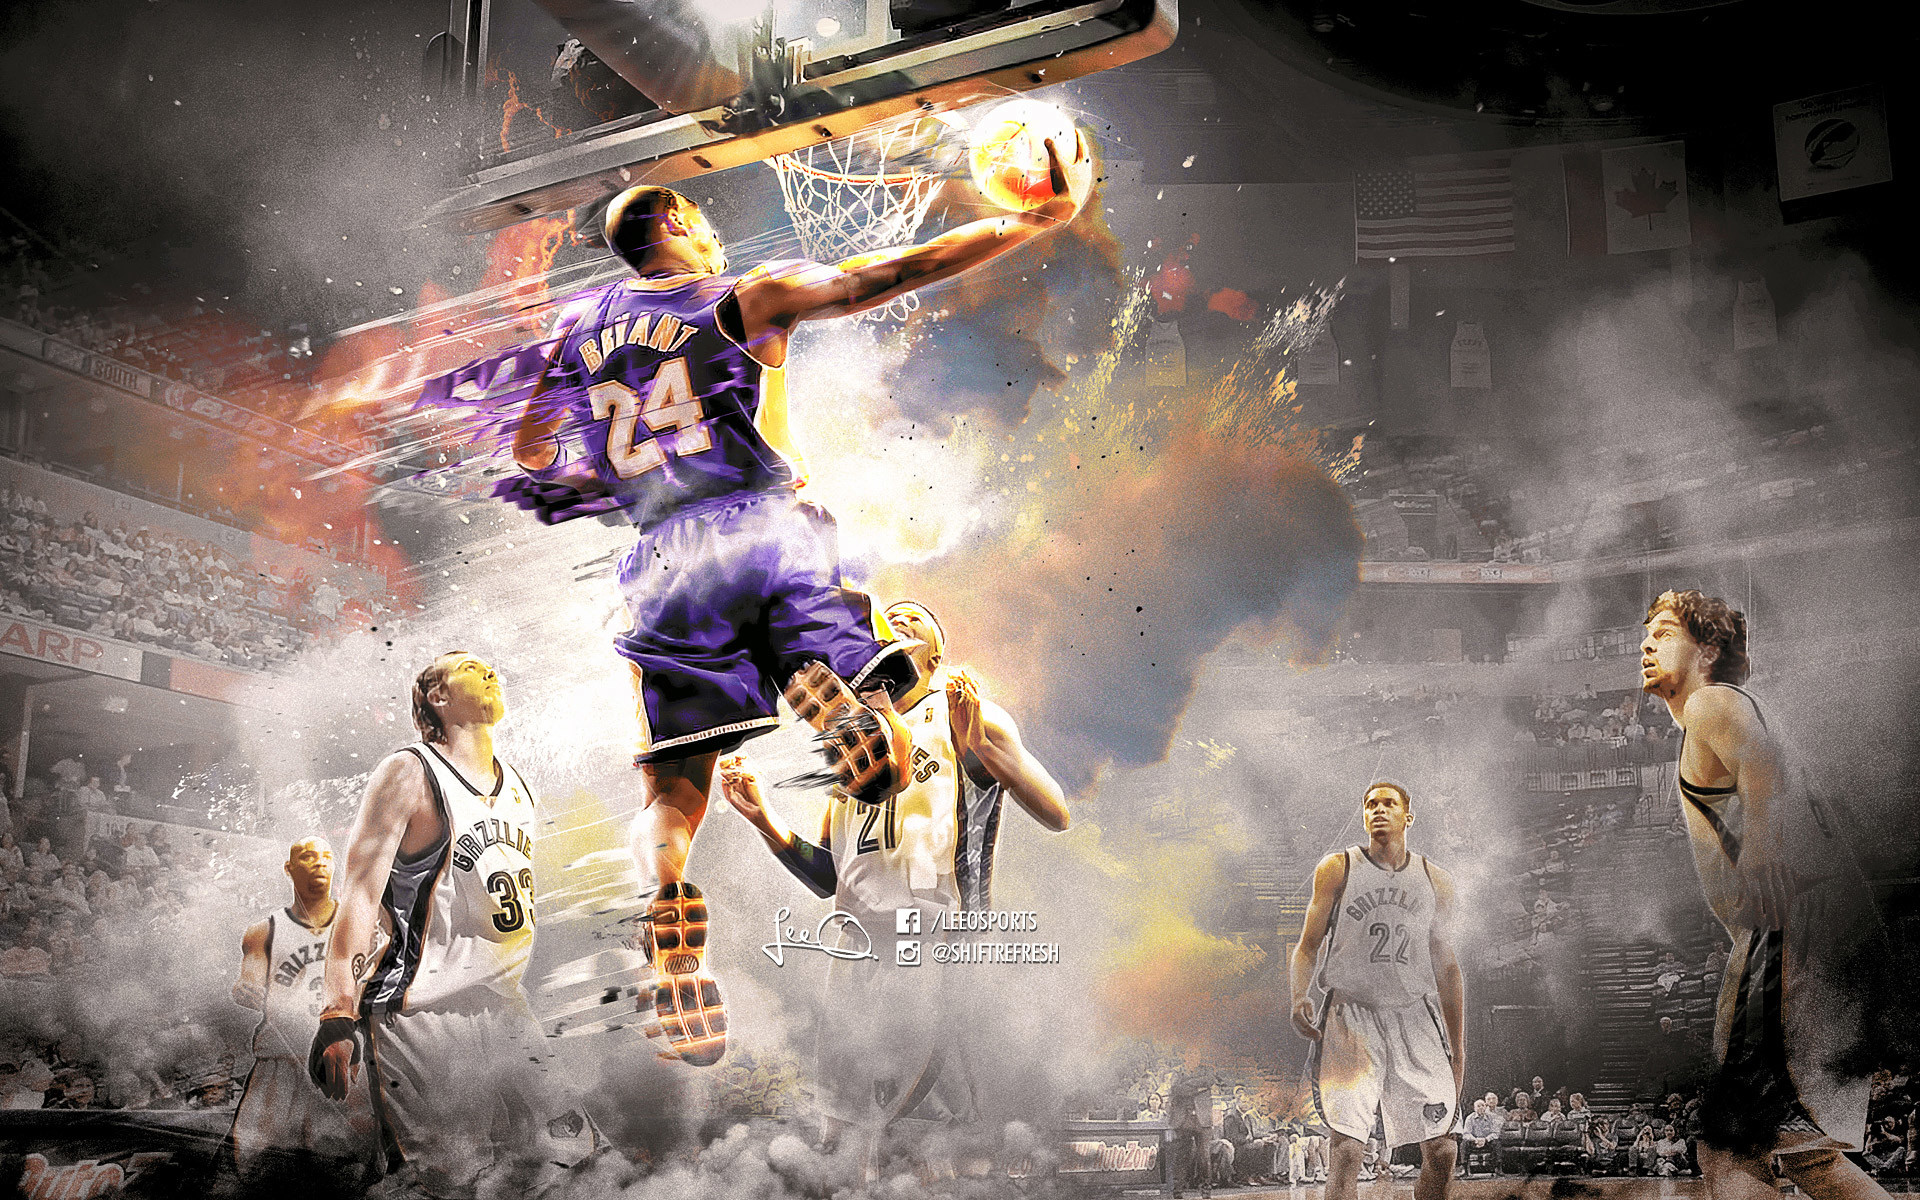 1920x1200 kobe | Search Results | Basketball Wallpapers at BasketWallpapers .